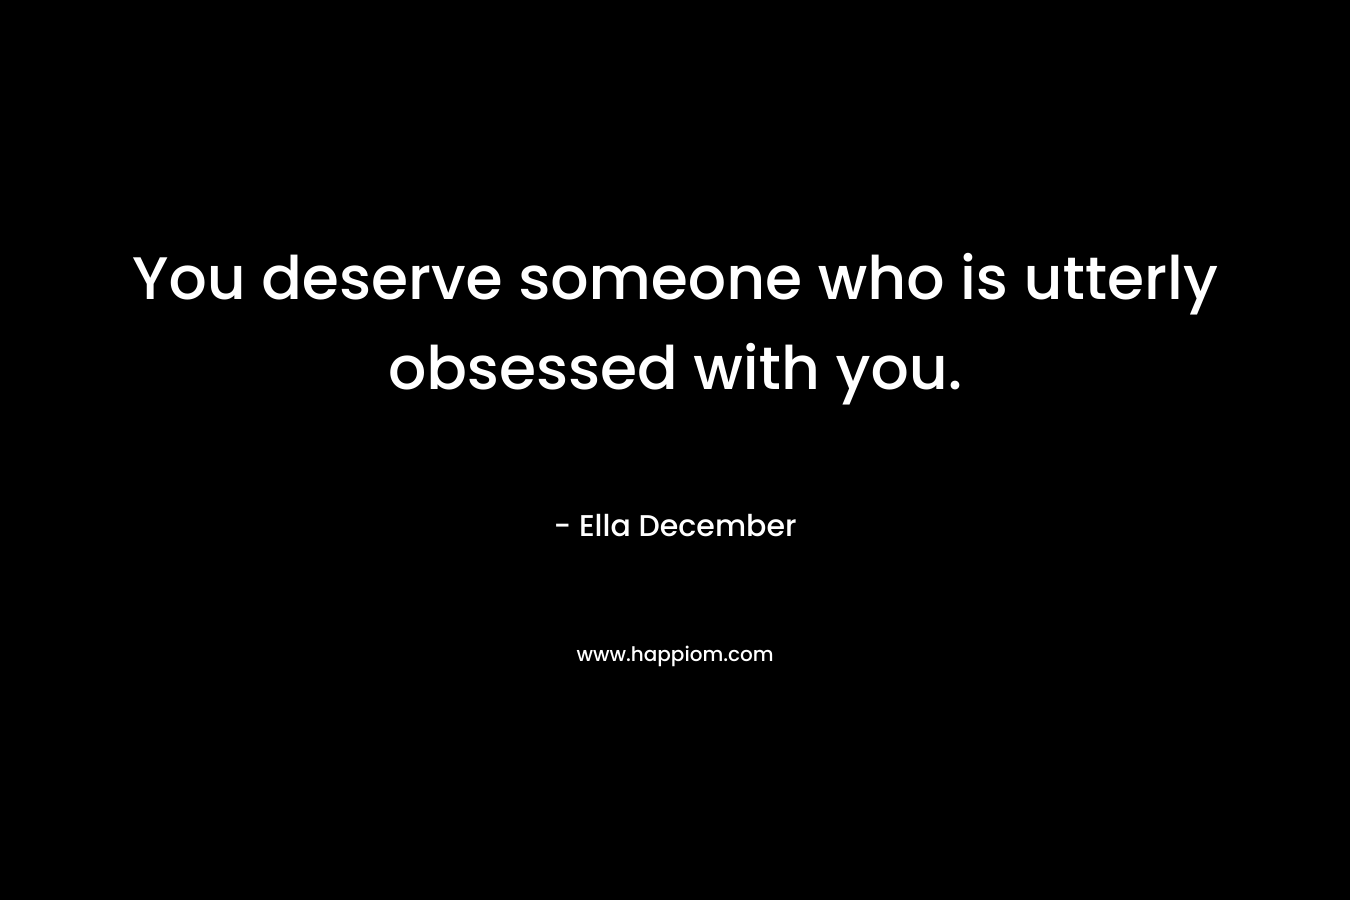 You deserve someone who is utterly obsessed with you. – Ella December